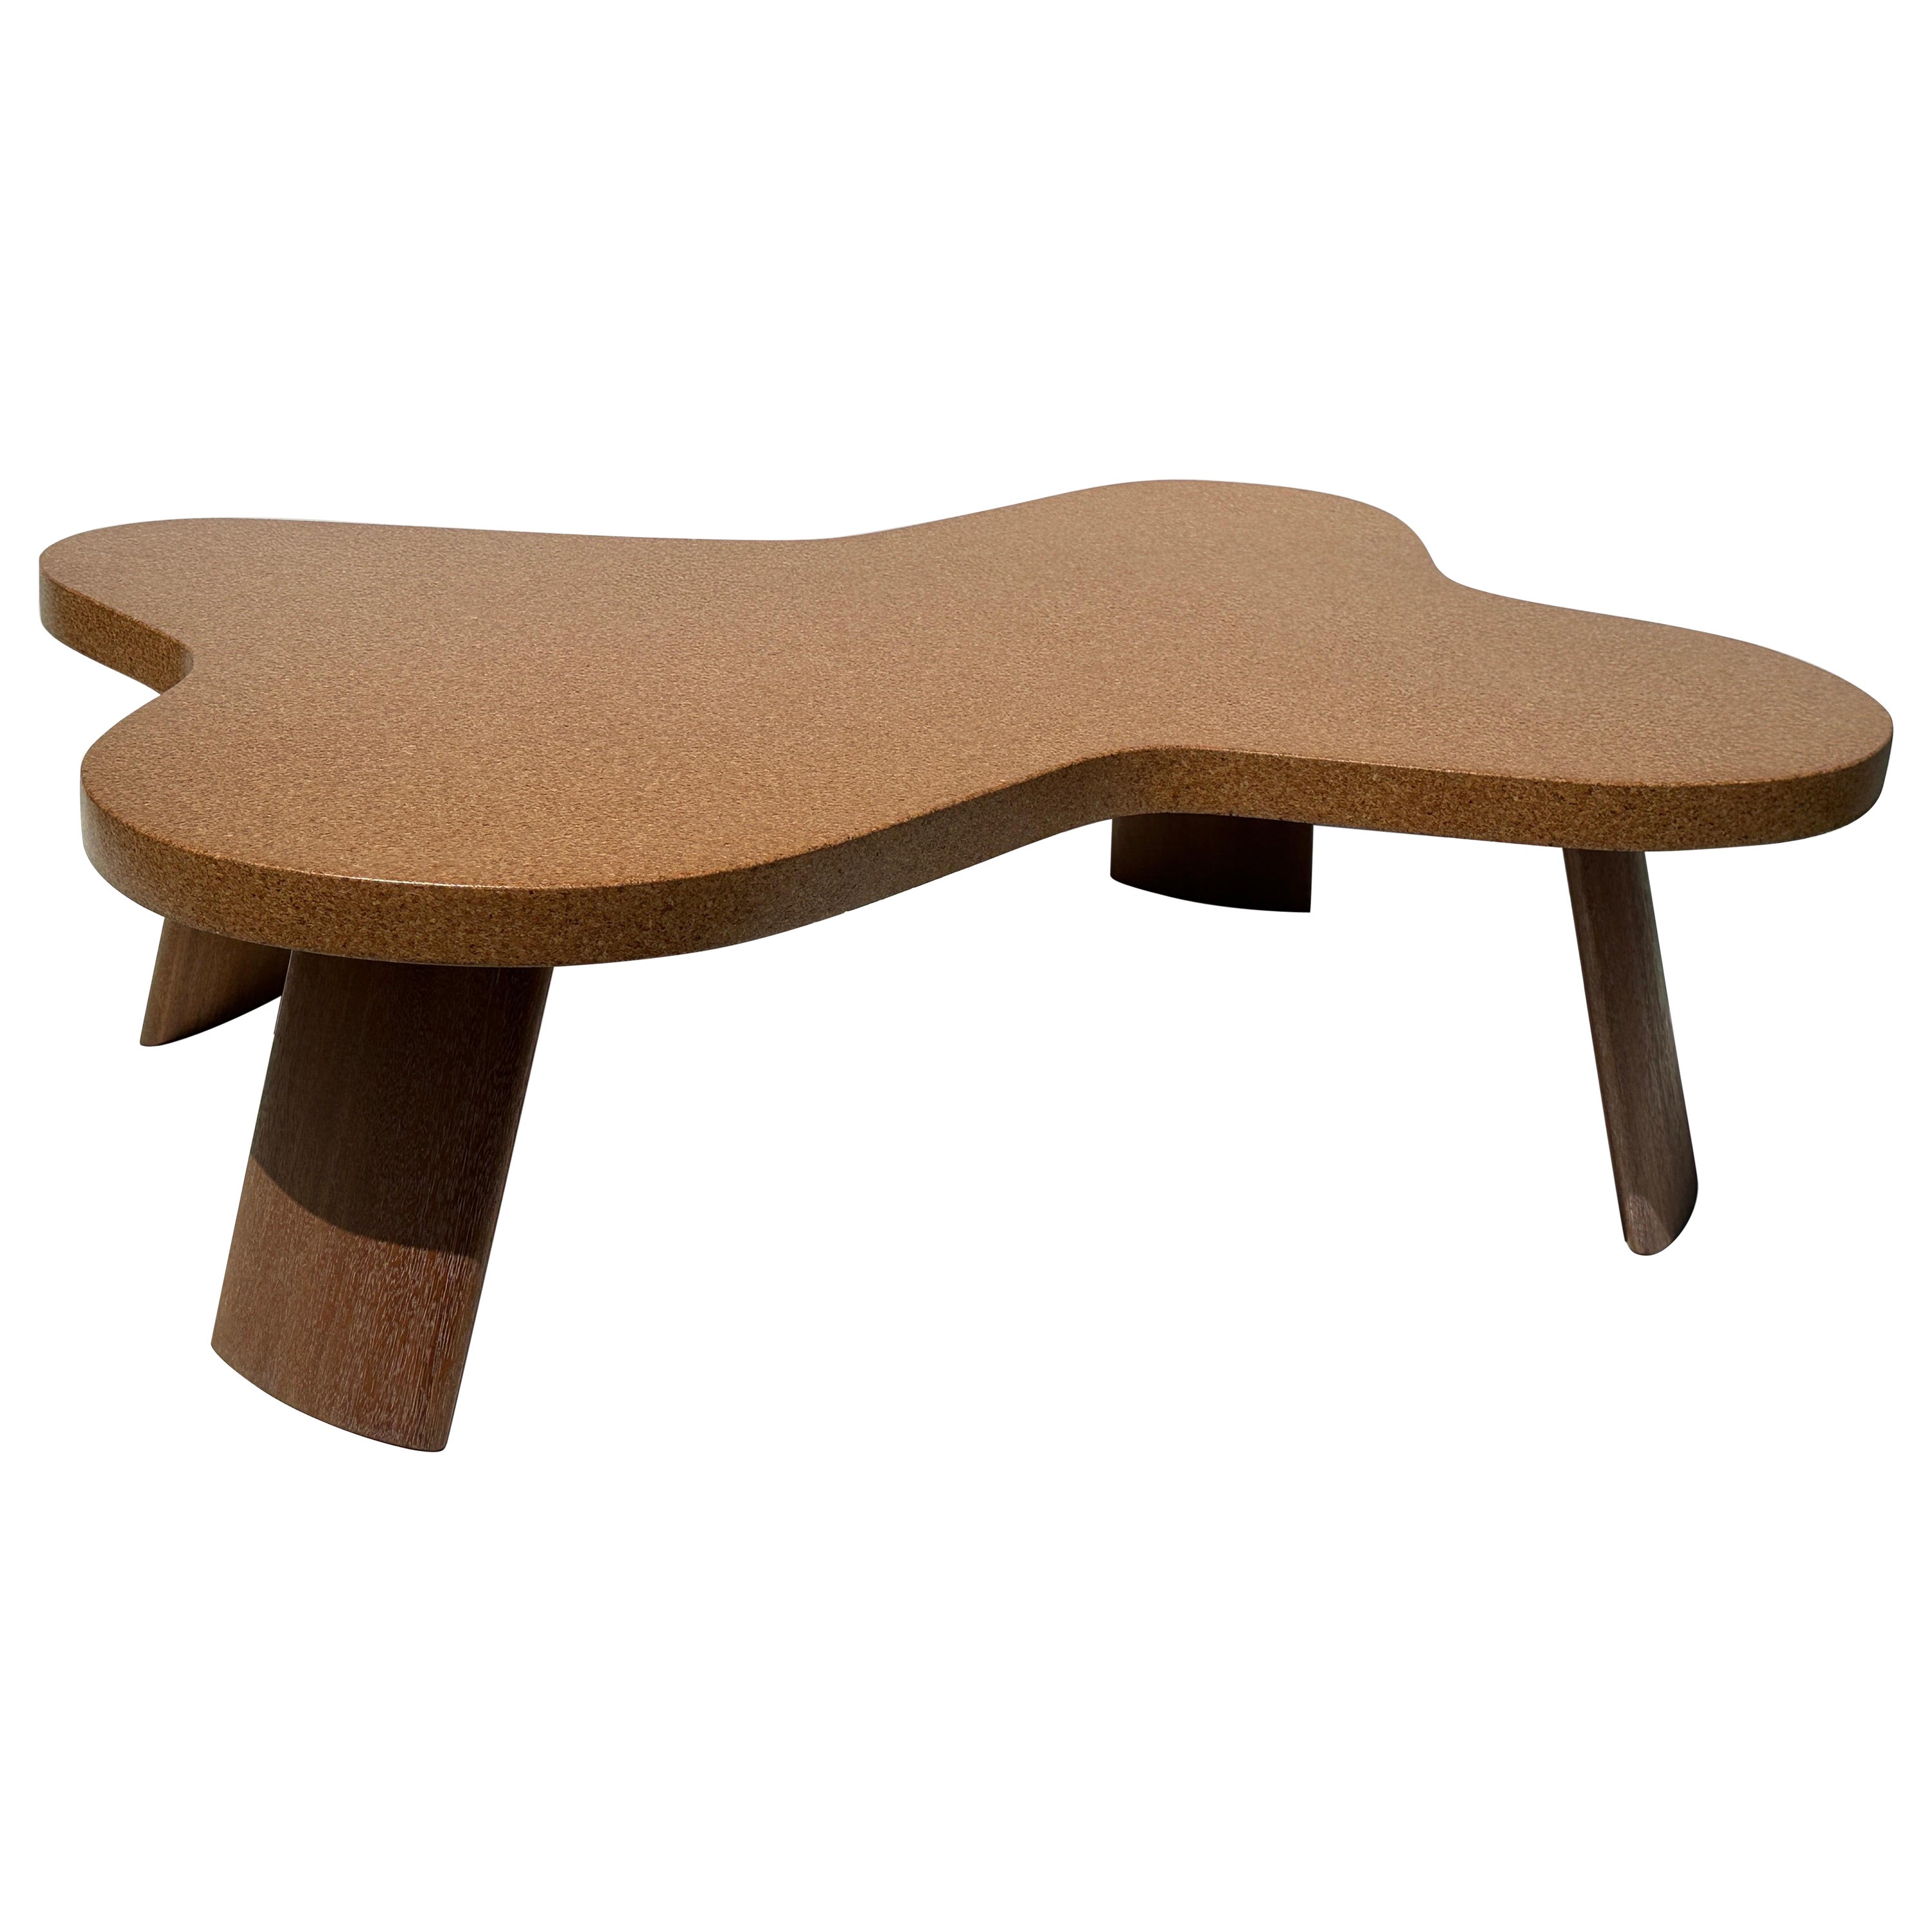 “Cloud” Cork Coffee Table For Sale